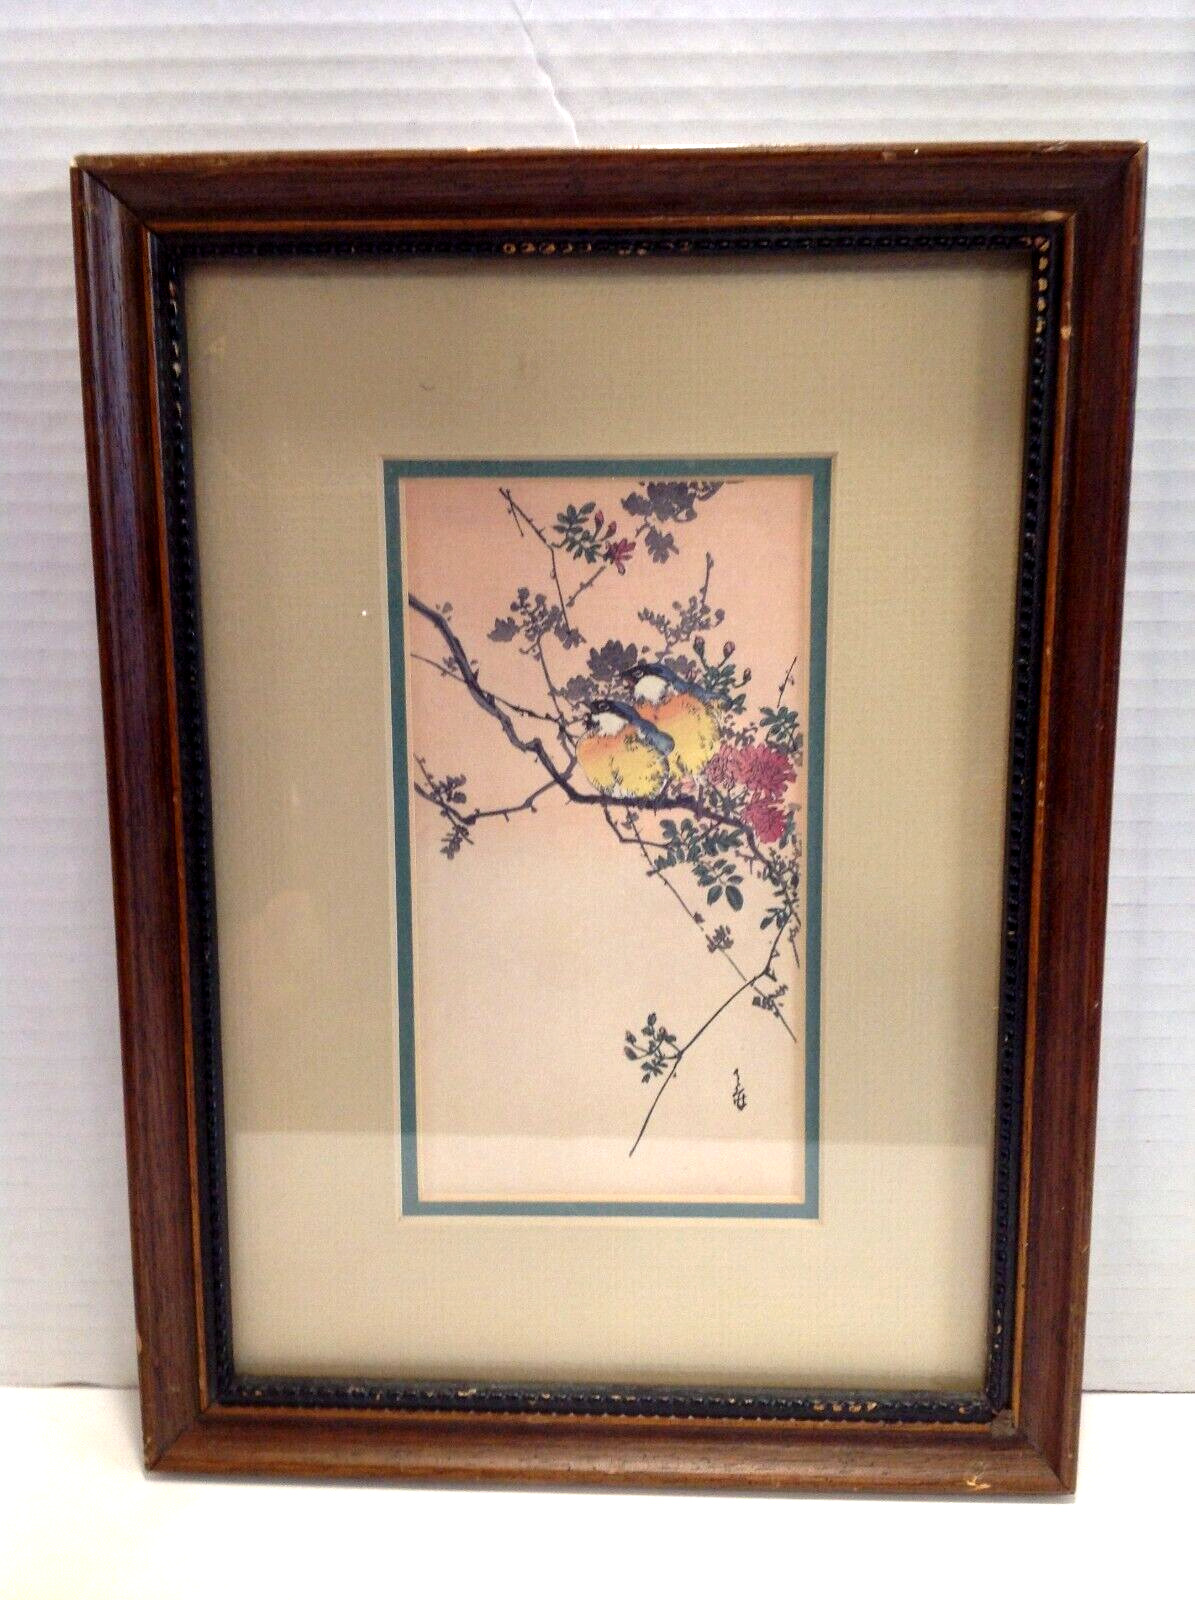 Antique Japanese Hand Painted Watercolor Framed and Matted Art